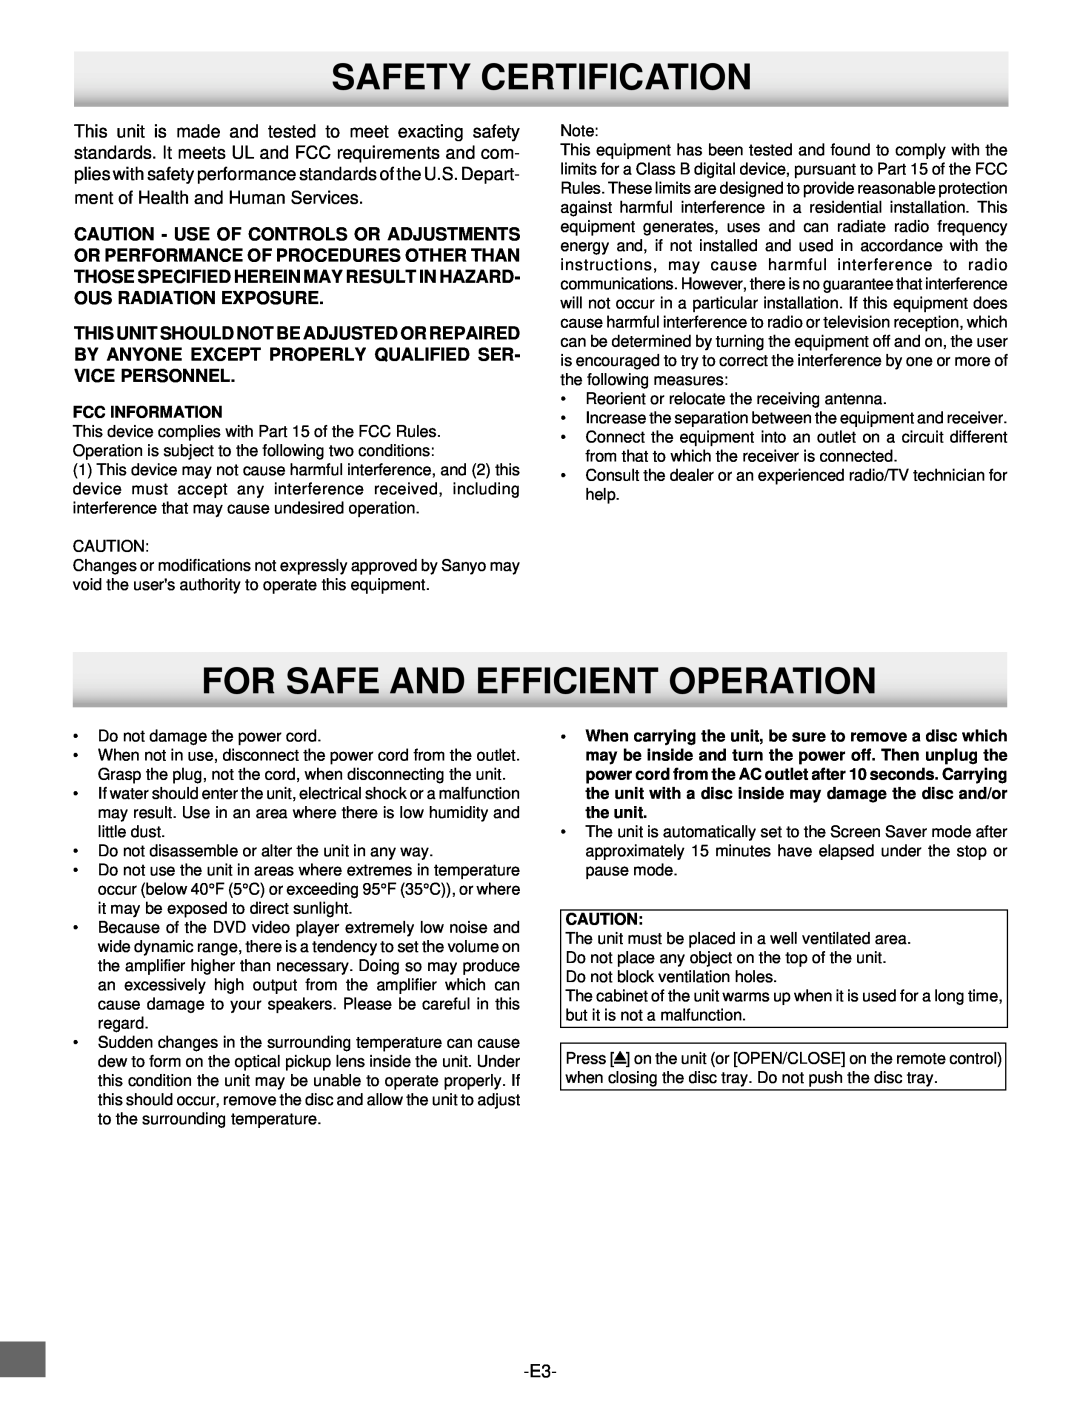 Sanyo DWM-2500 instruction manual Safety Certification, For Safe And Efficient Operation 